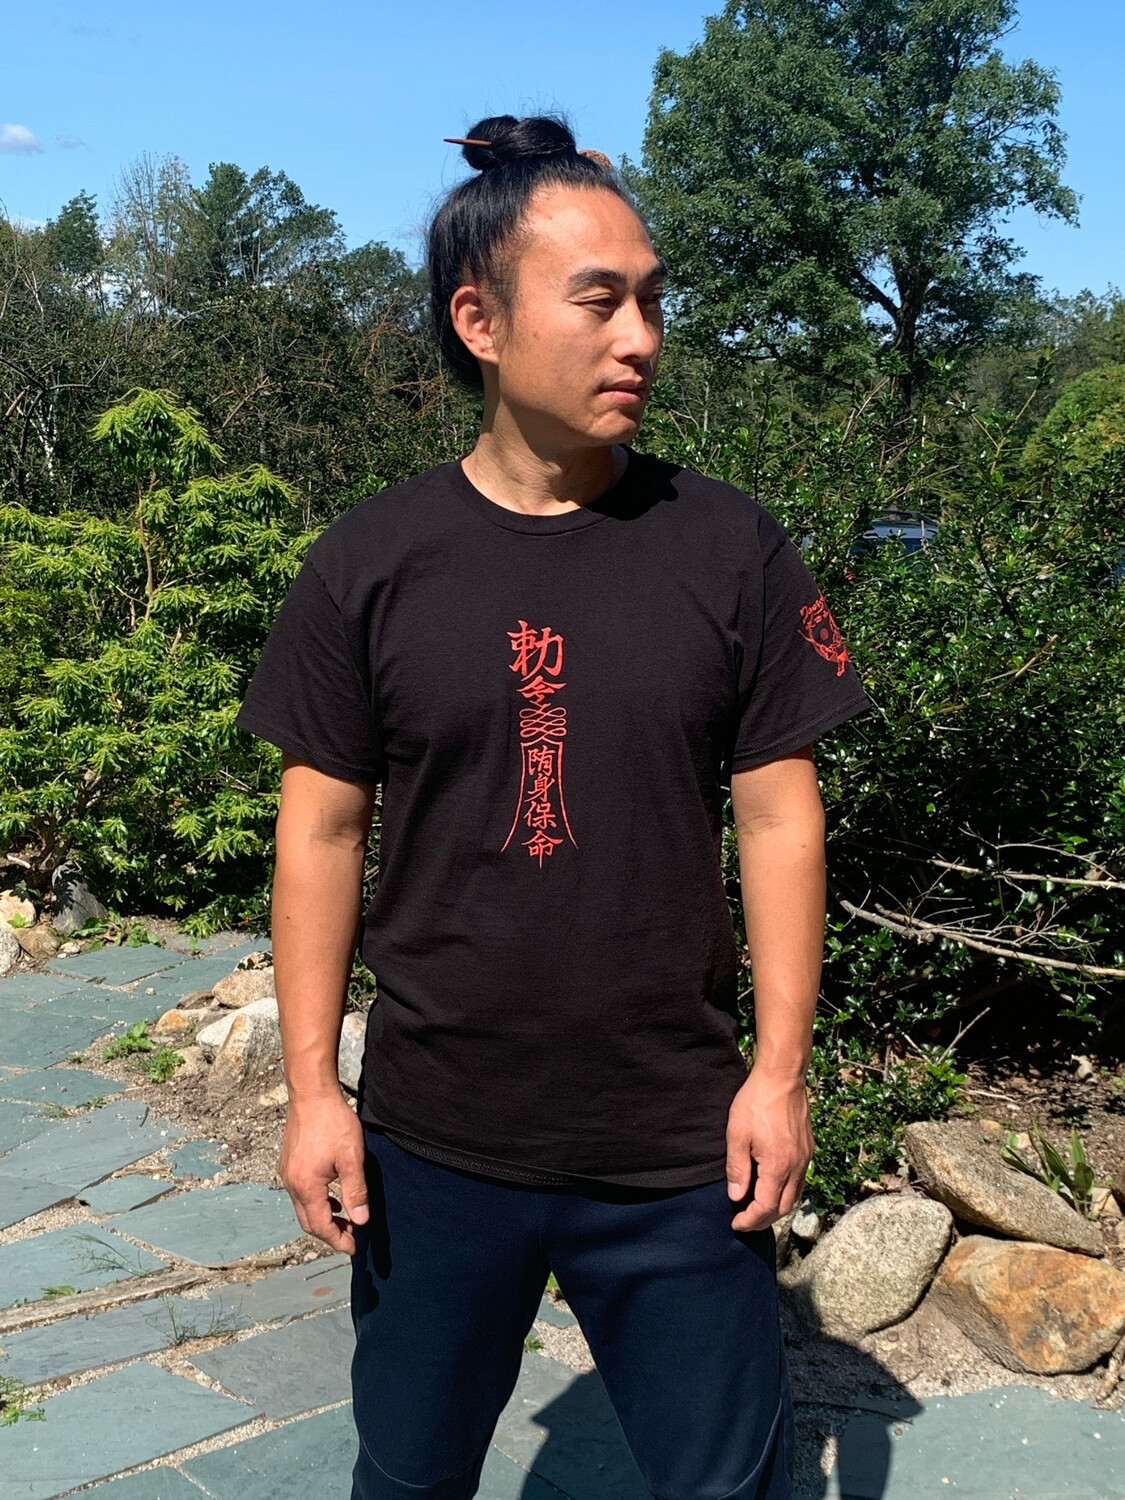 T-Shirts with Daoist Gate Wudang Arts Logo and talismans. “Protecting Your Life”